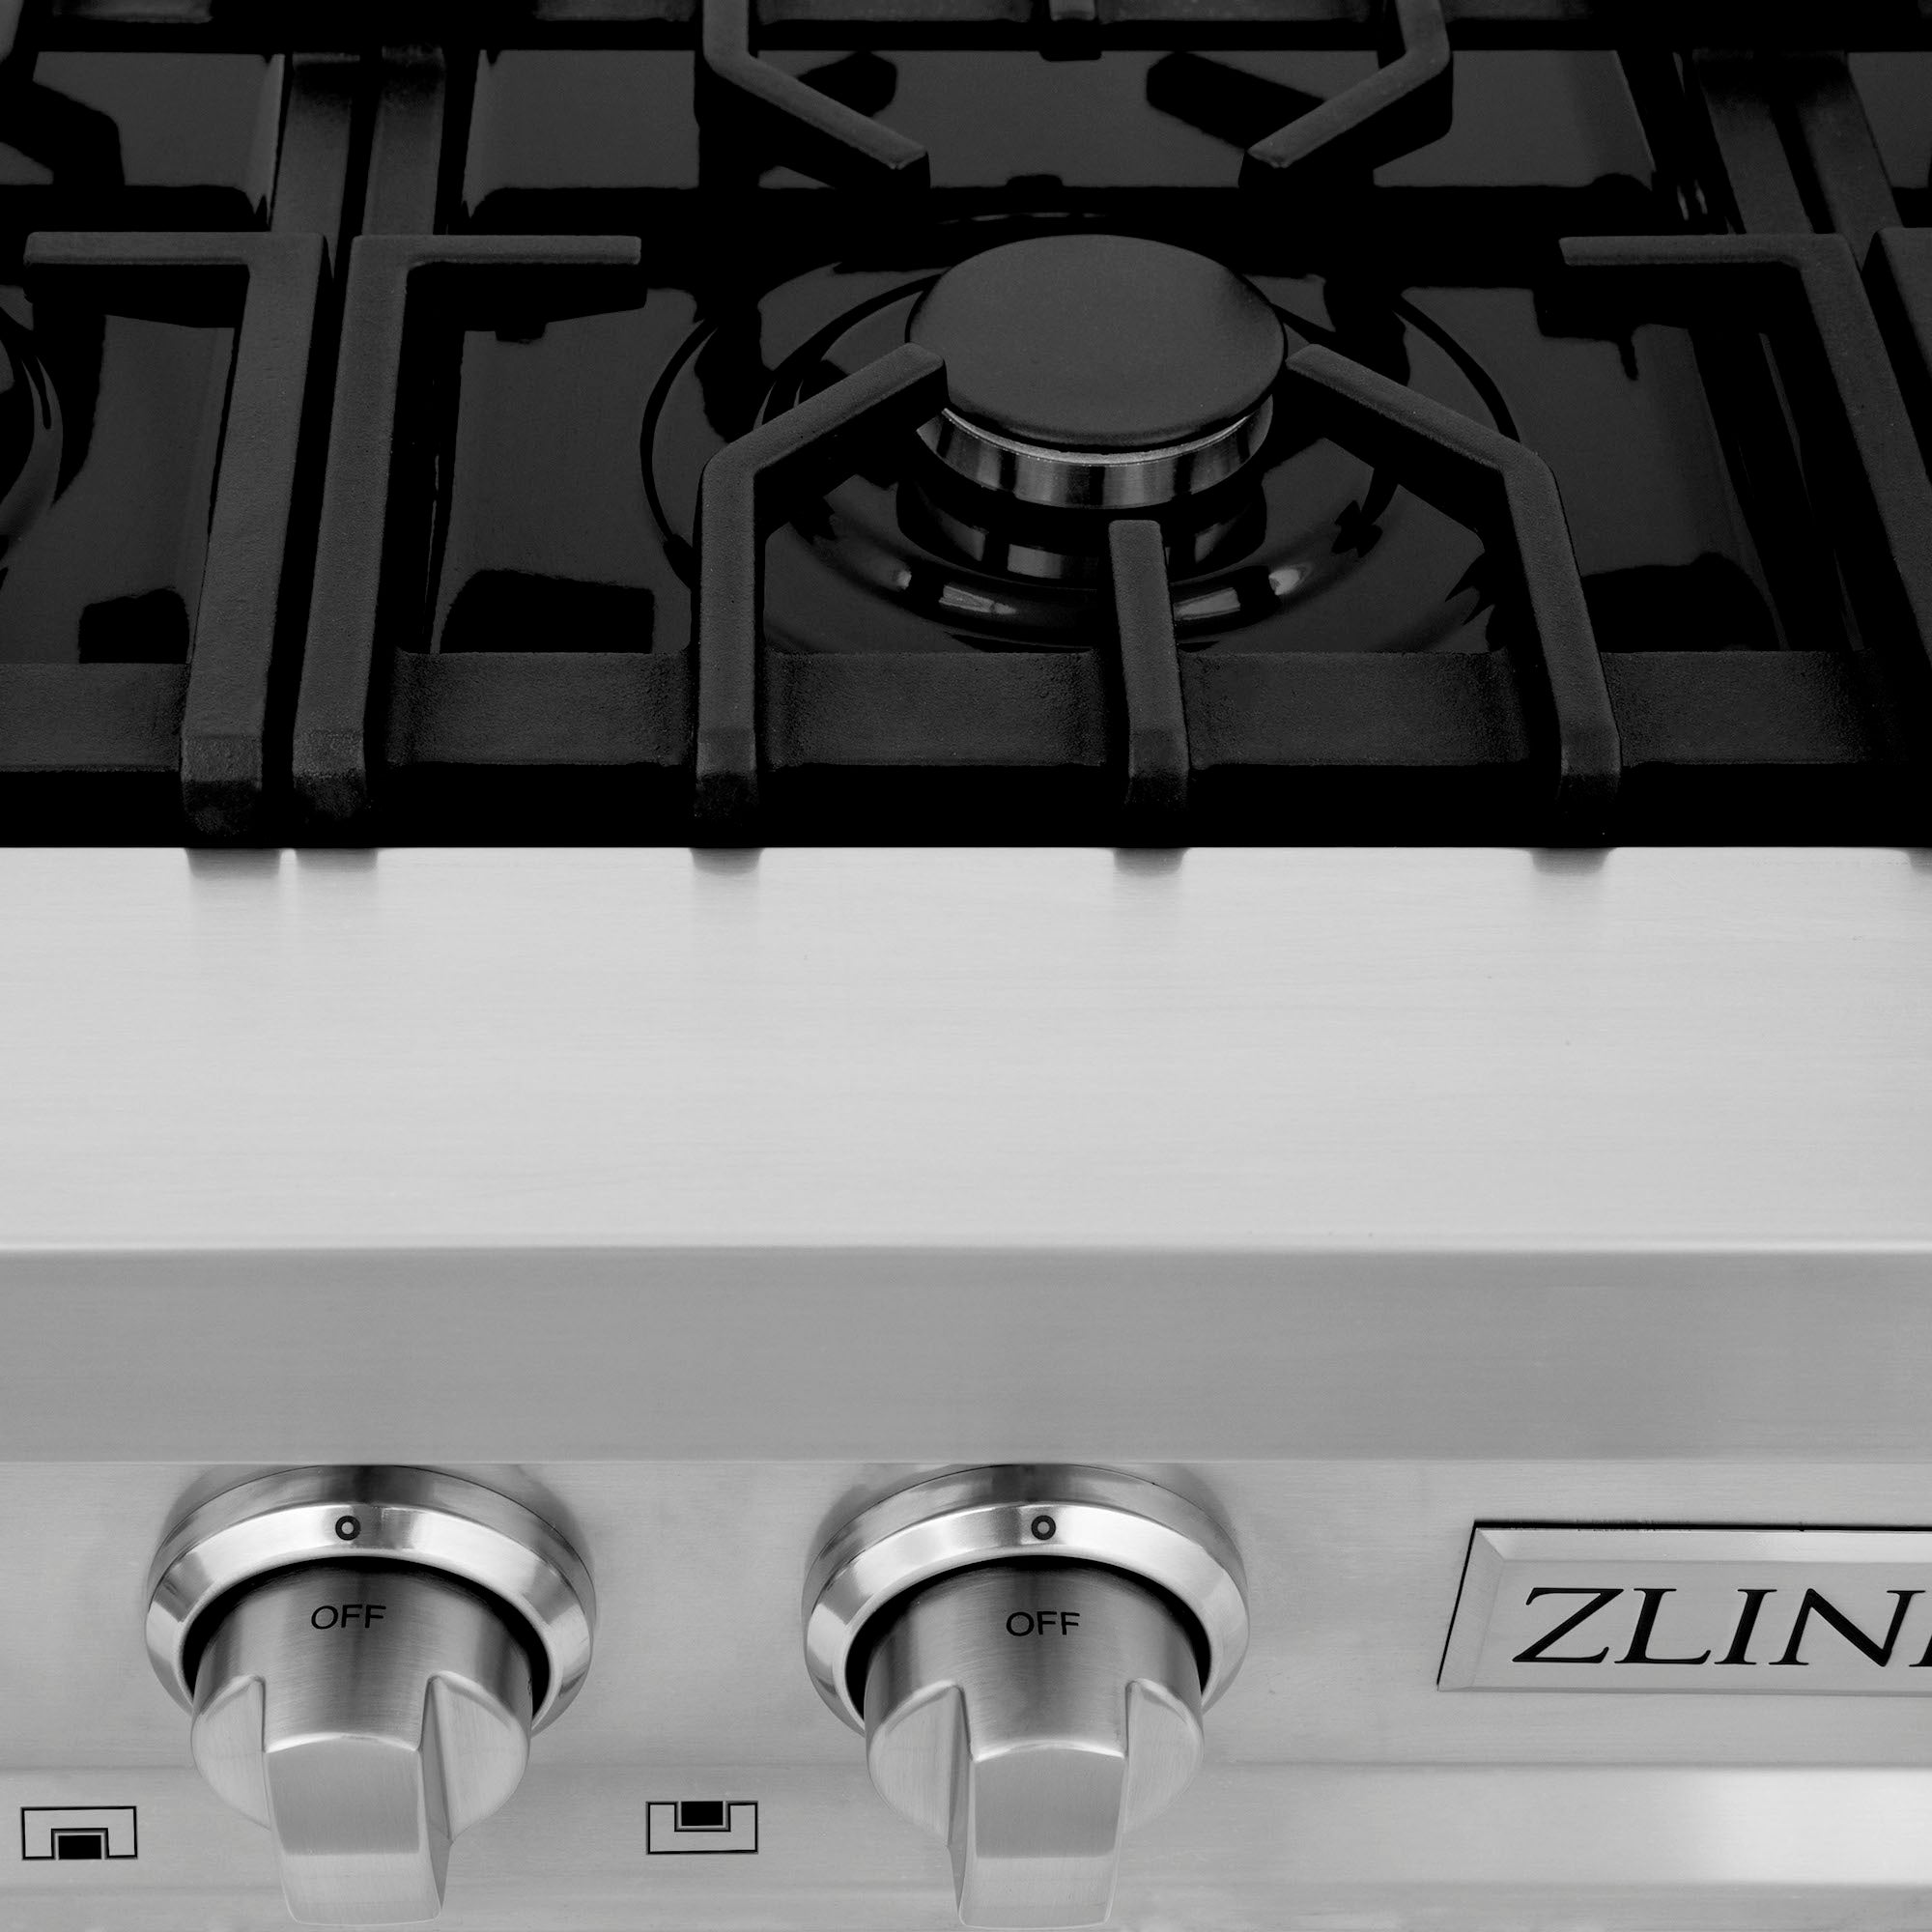 ZLINE Kitchen Package with 36" Stainless Steel Rangetop and 30" Single  Wall Oven (2KP-RTAWS36)